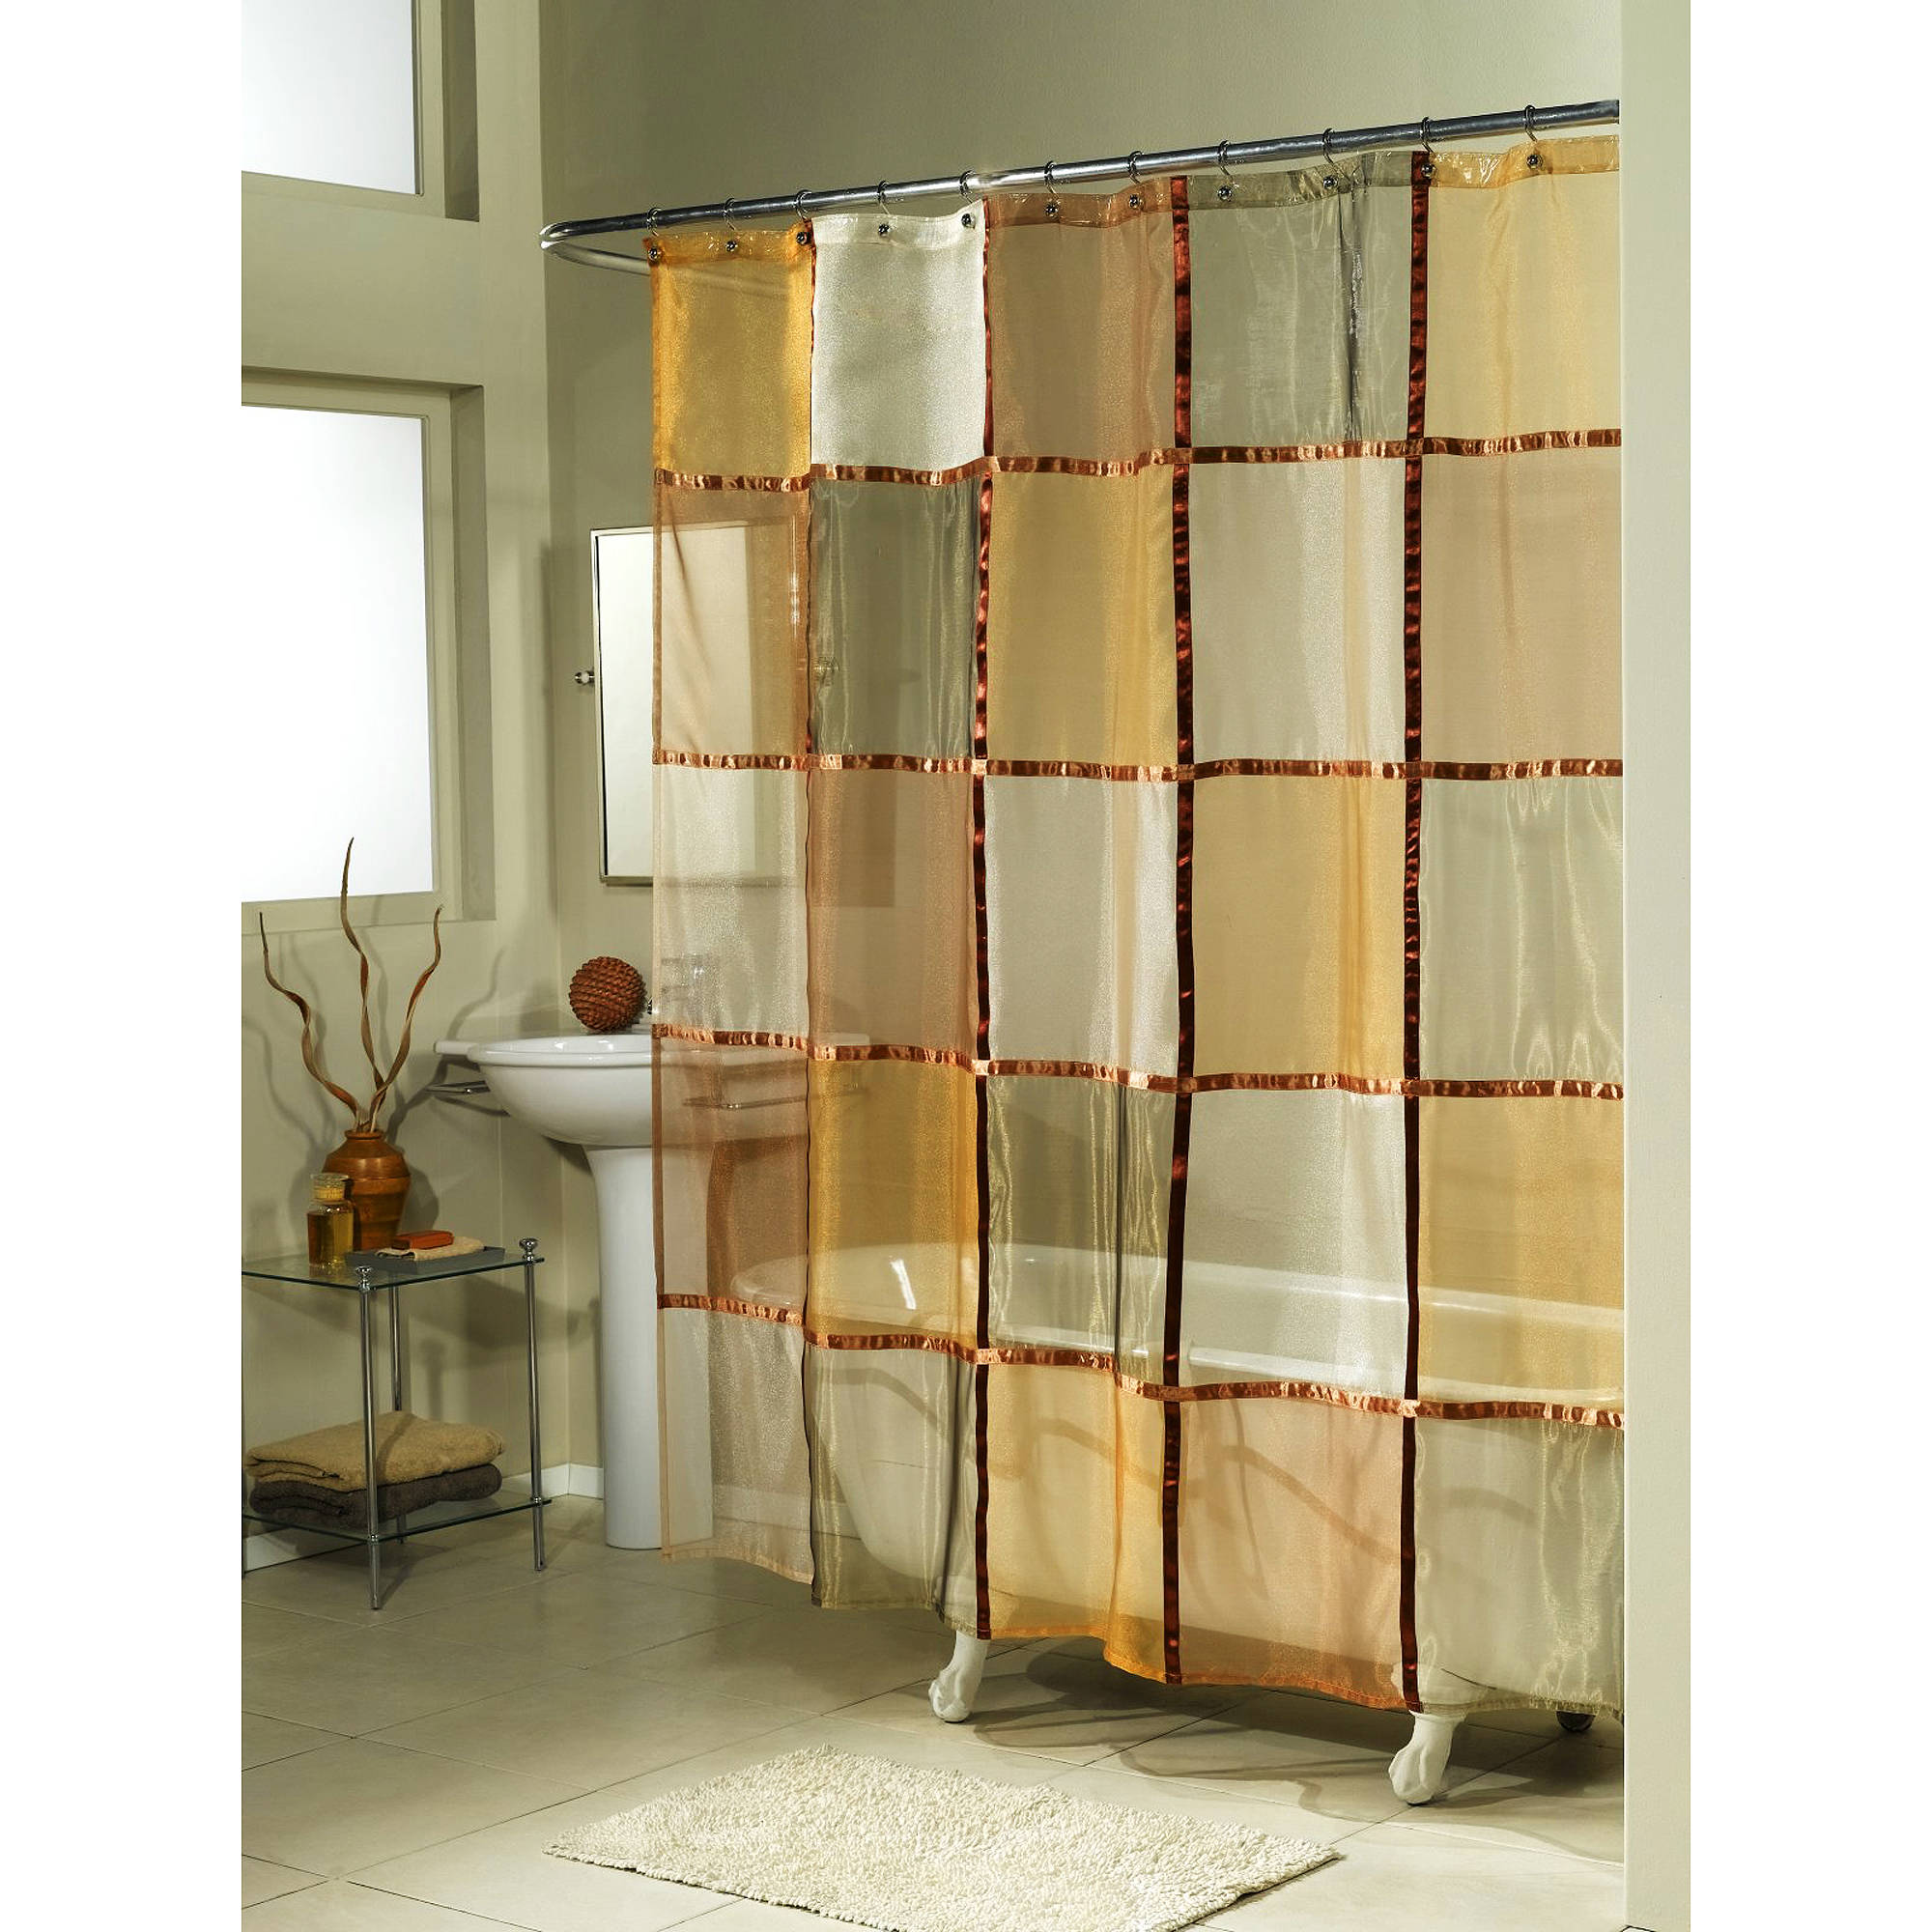 Ex-Cell Home Fashions Mosaic Fabric Shower Curtain, Terra Cotta - image 1 of 3